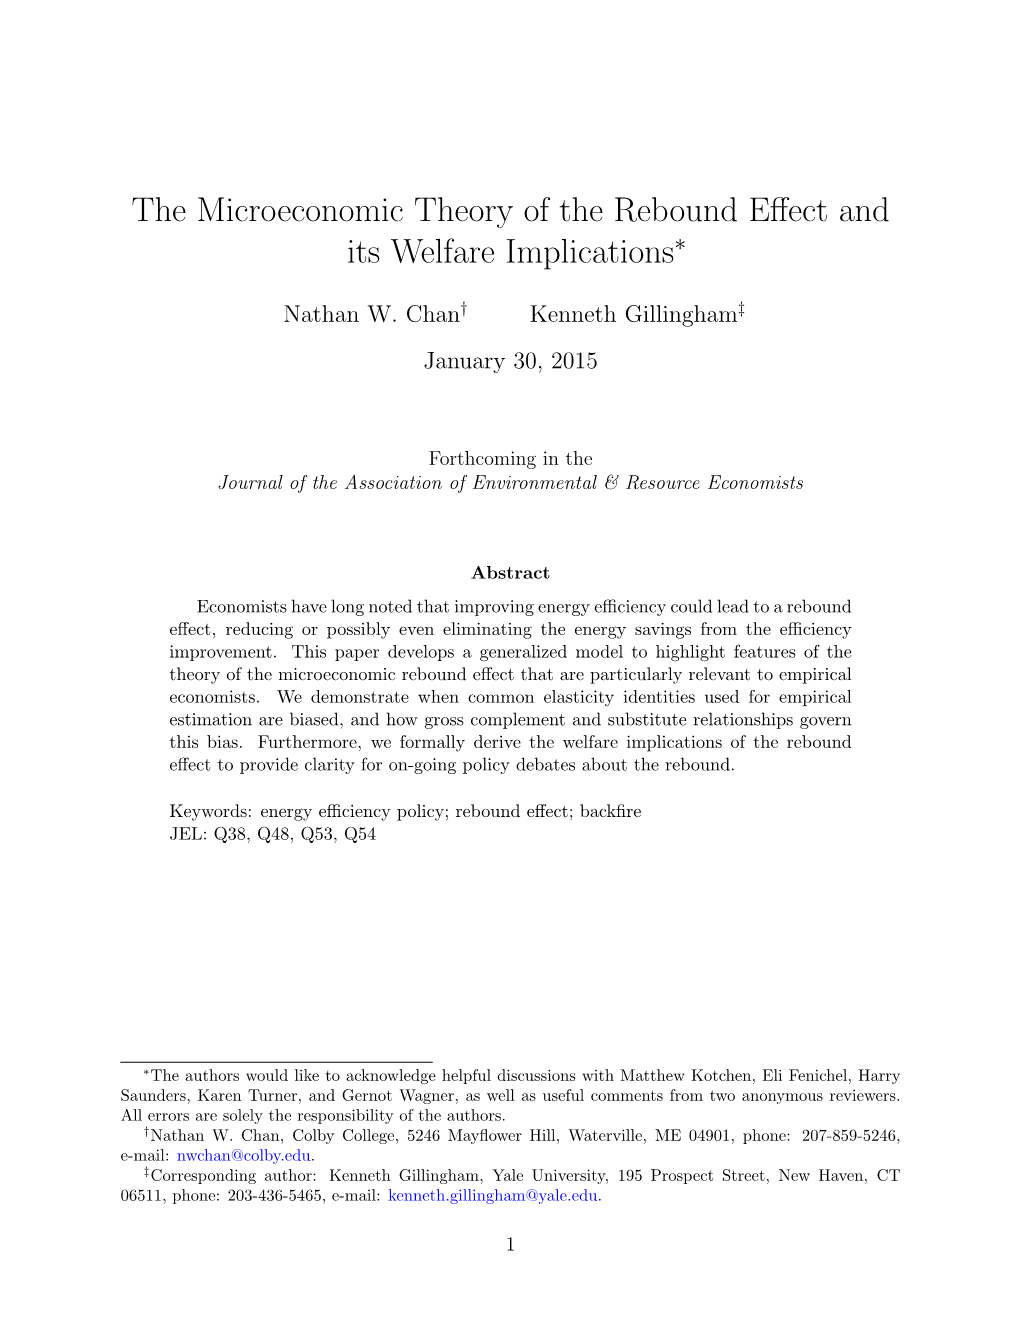 The Microeconomic Theory of the Rebound Effect and Its Welfare